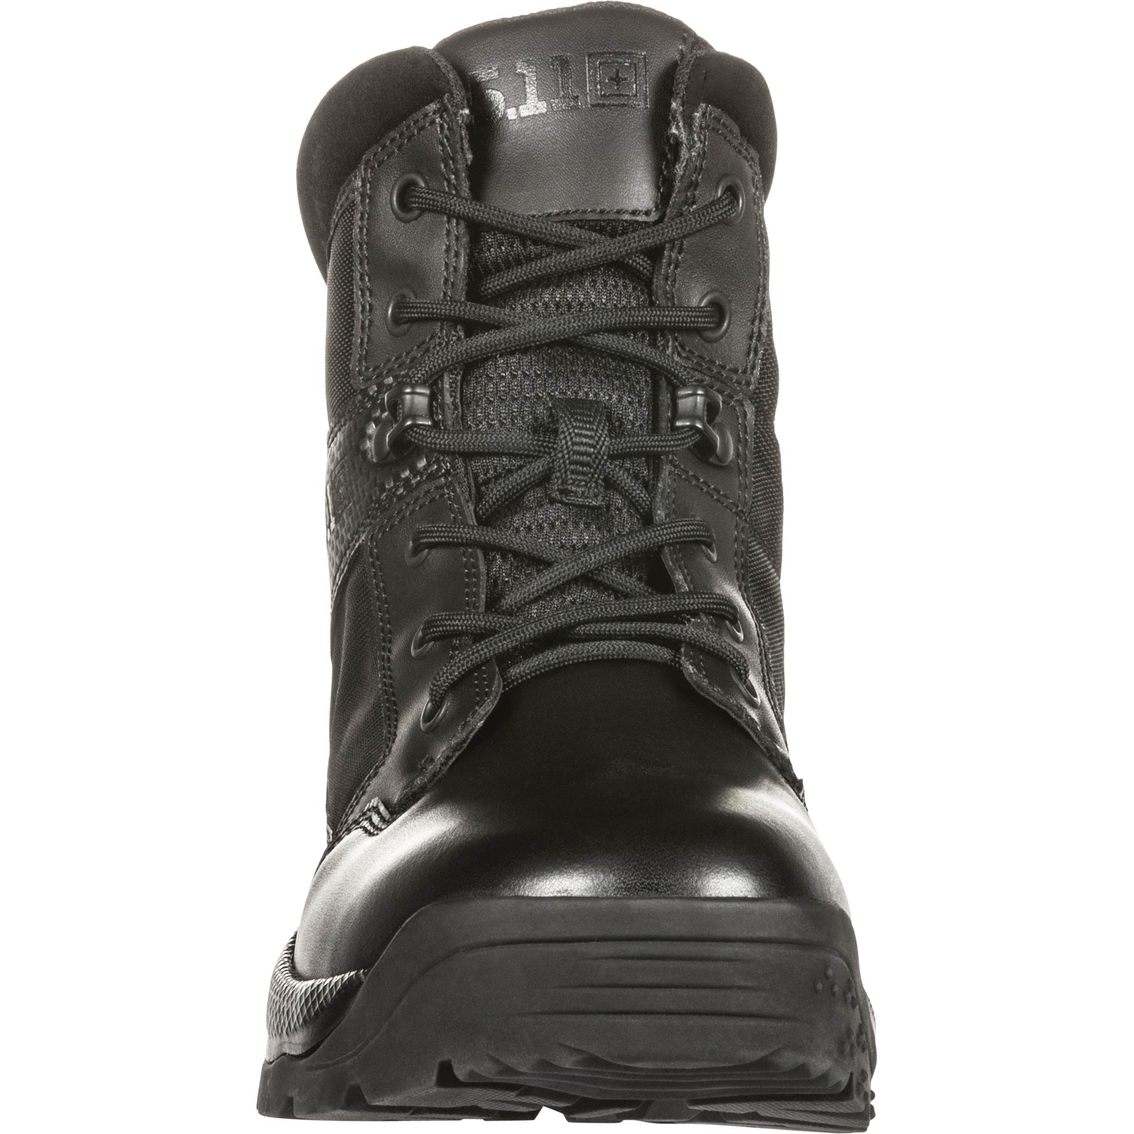 5.11 Men's A.T.A.C. 2.0 6 in. Boots - Image 4 of 5